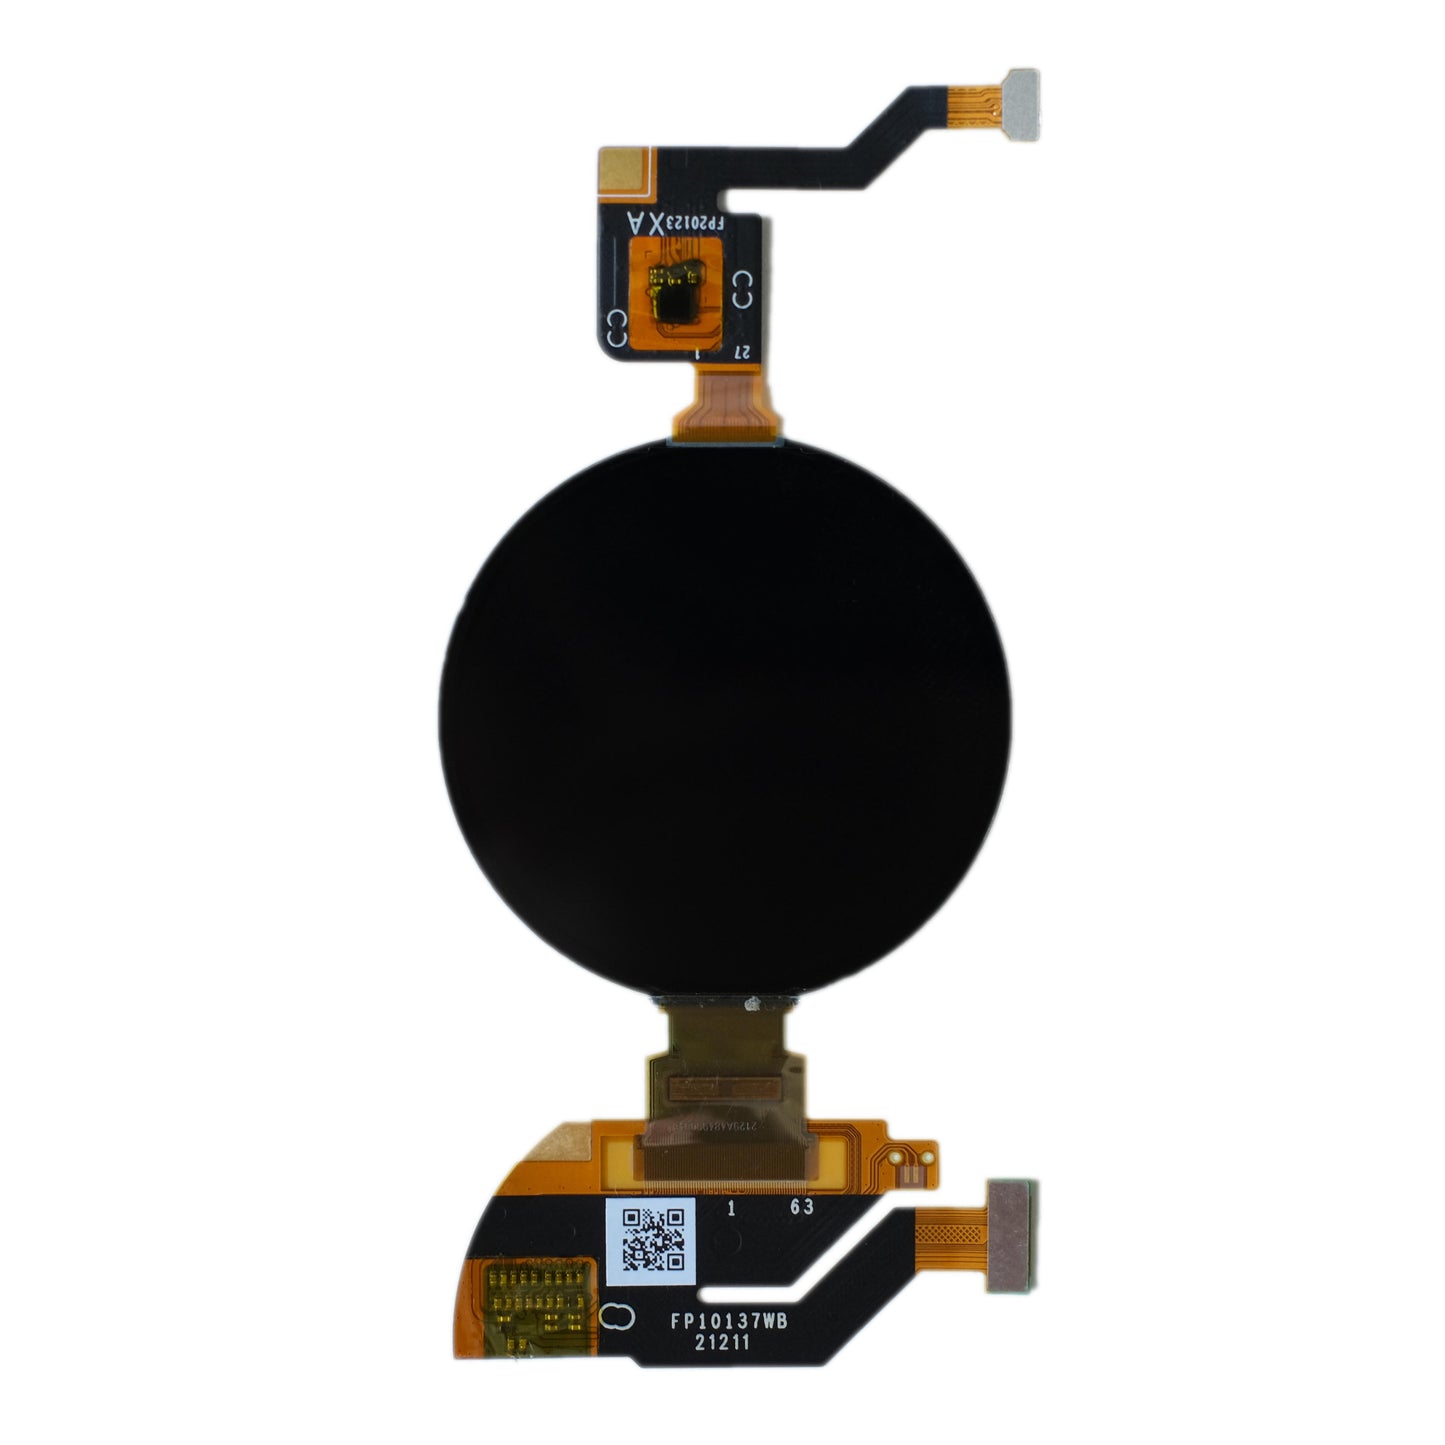 1.4-inch Round AMOLED Display Panel, 454x454 resolution, 16.7M colors, MIPI and SPI interfaces